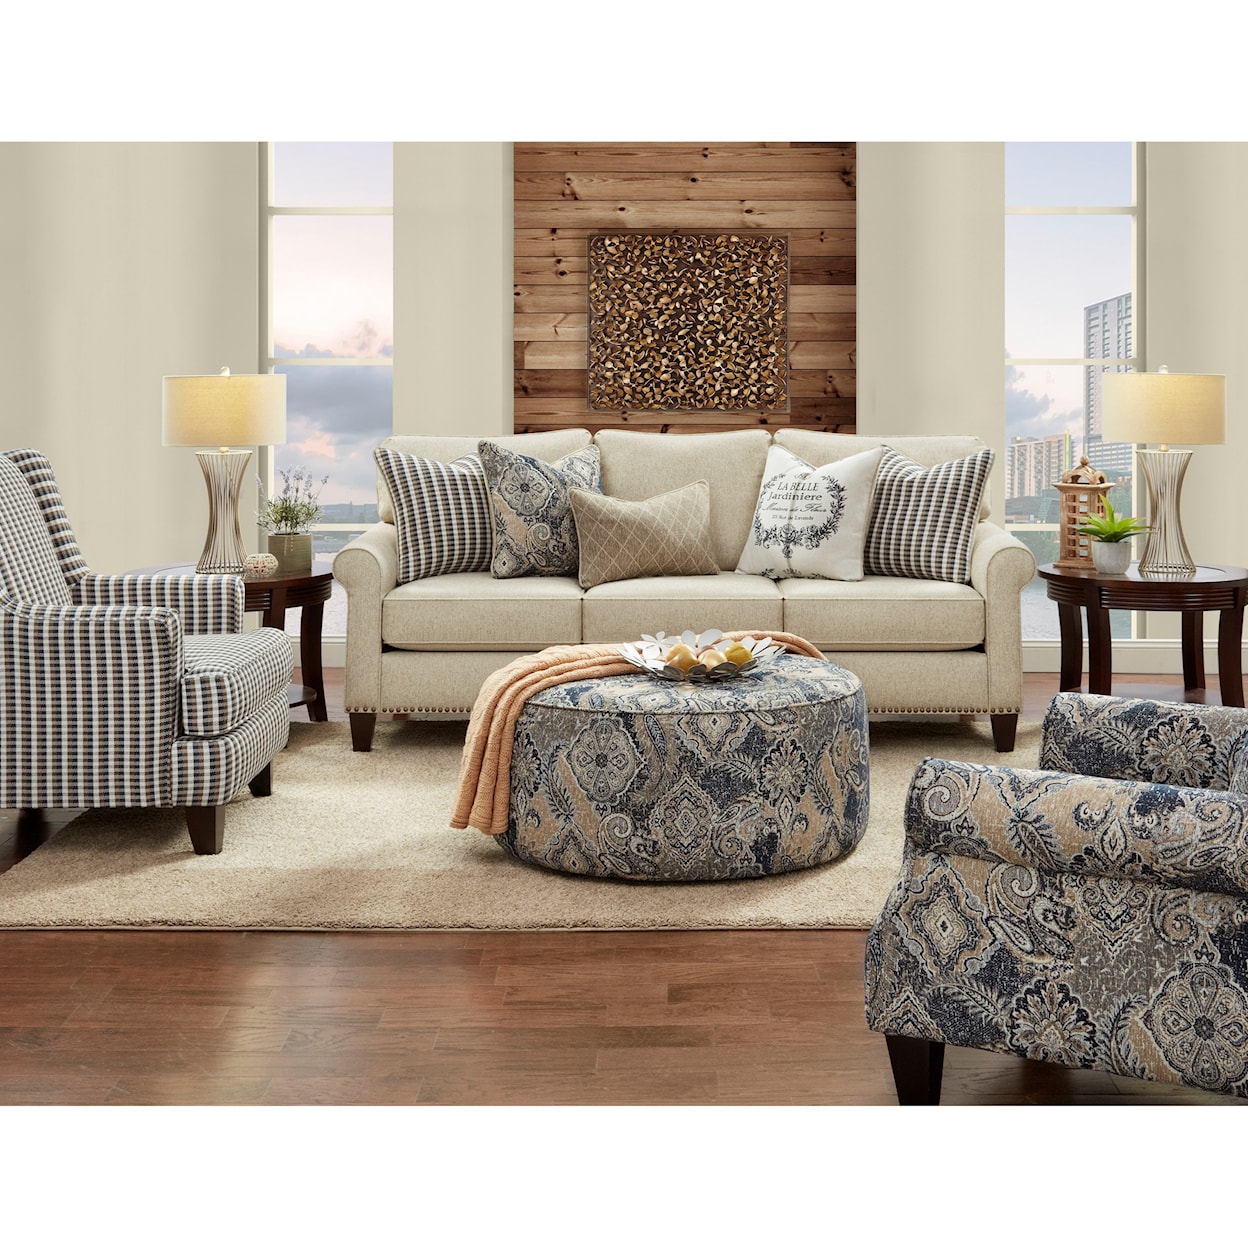 Fusion Furniture 533 Accent Chair